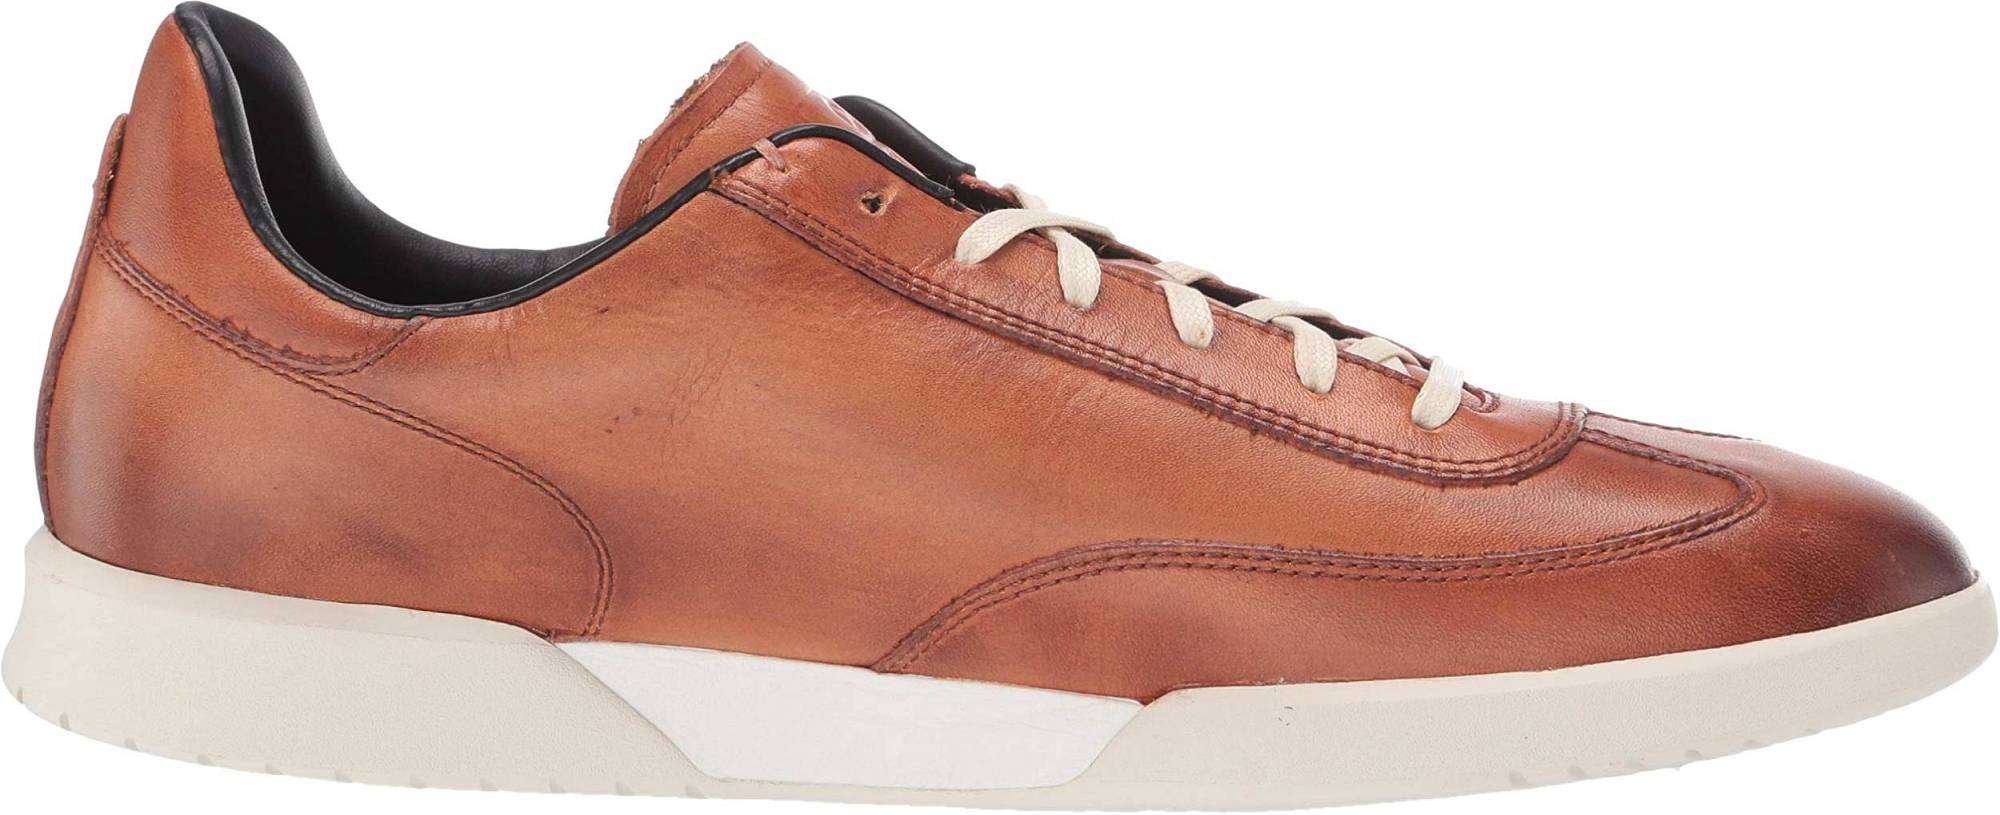 Cole Haan GrandPro Turf Sneaker  Shoes Reviews &  Reasons ...